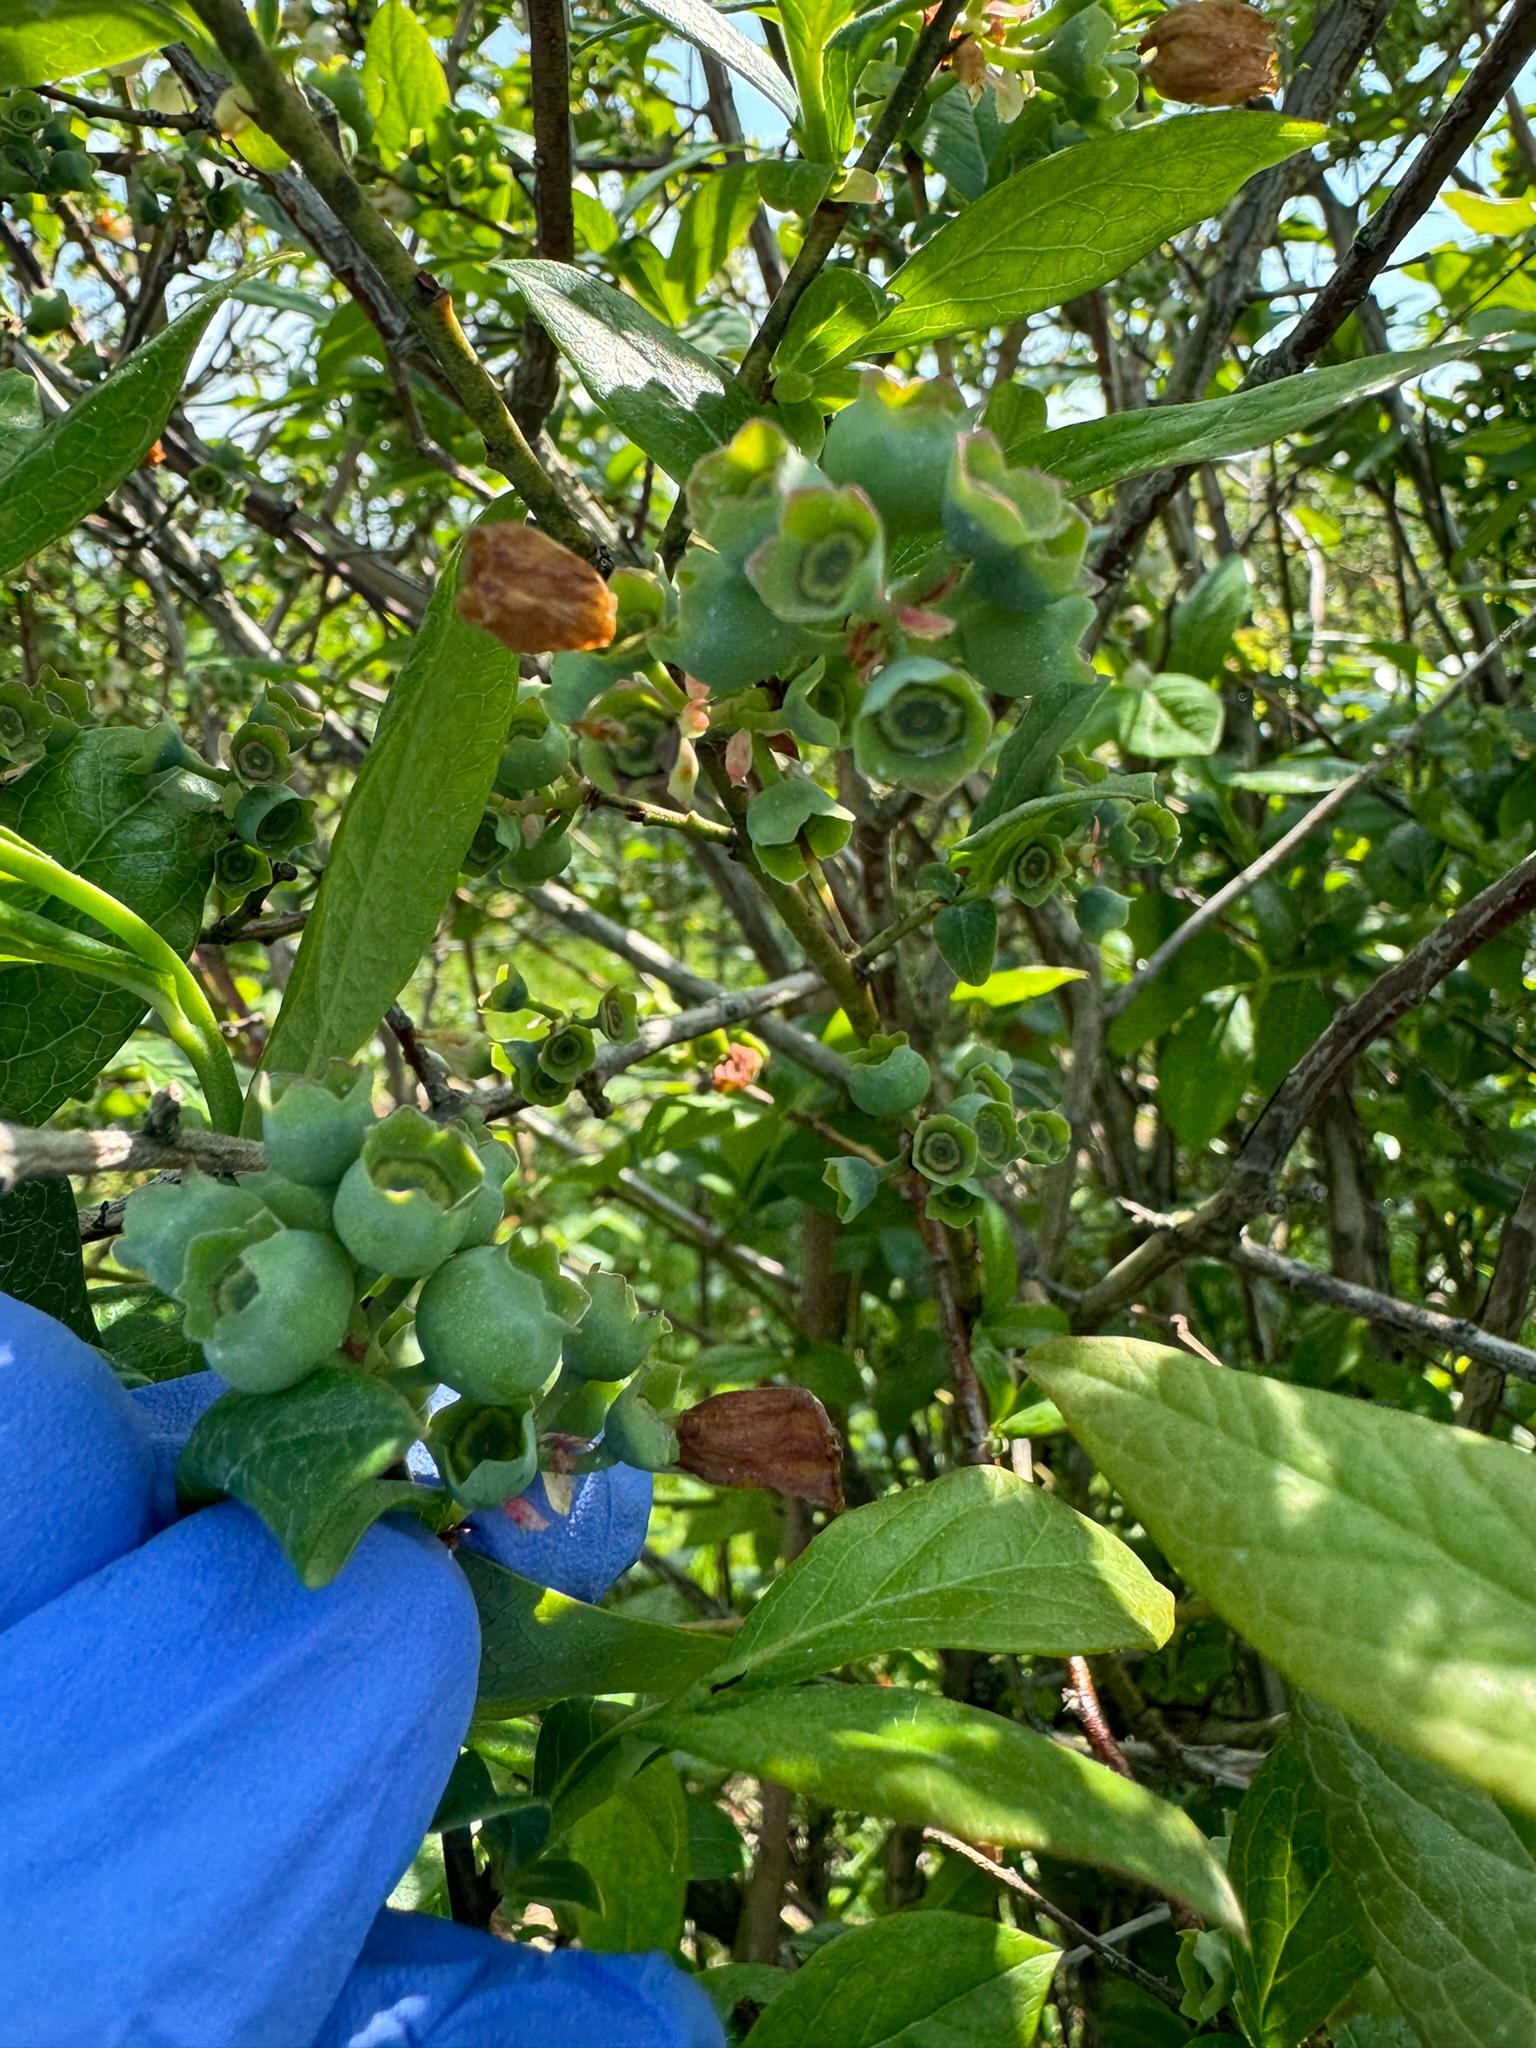 Blueberries hanging from a tree.